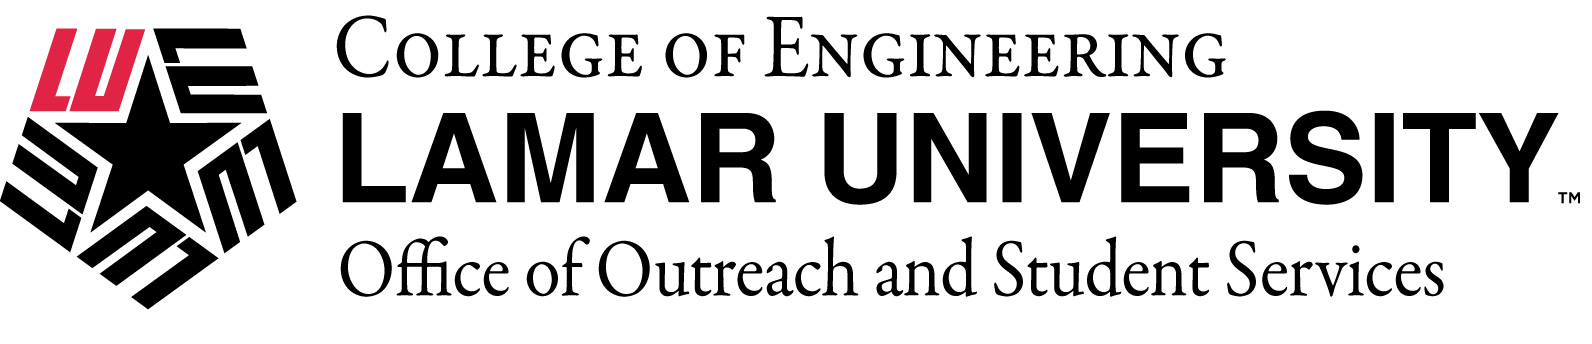 Office of outreach and student services logo